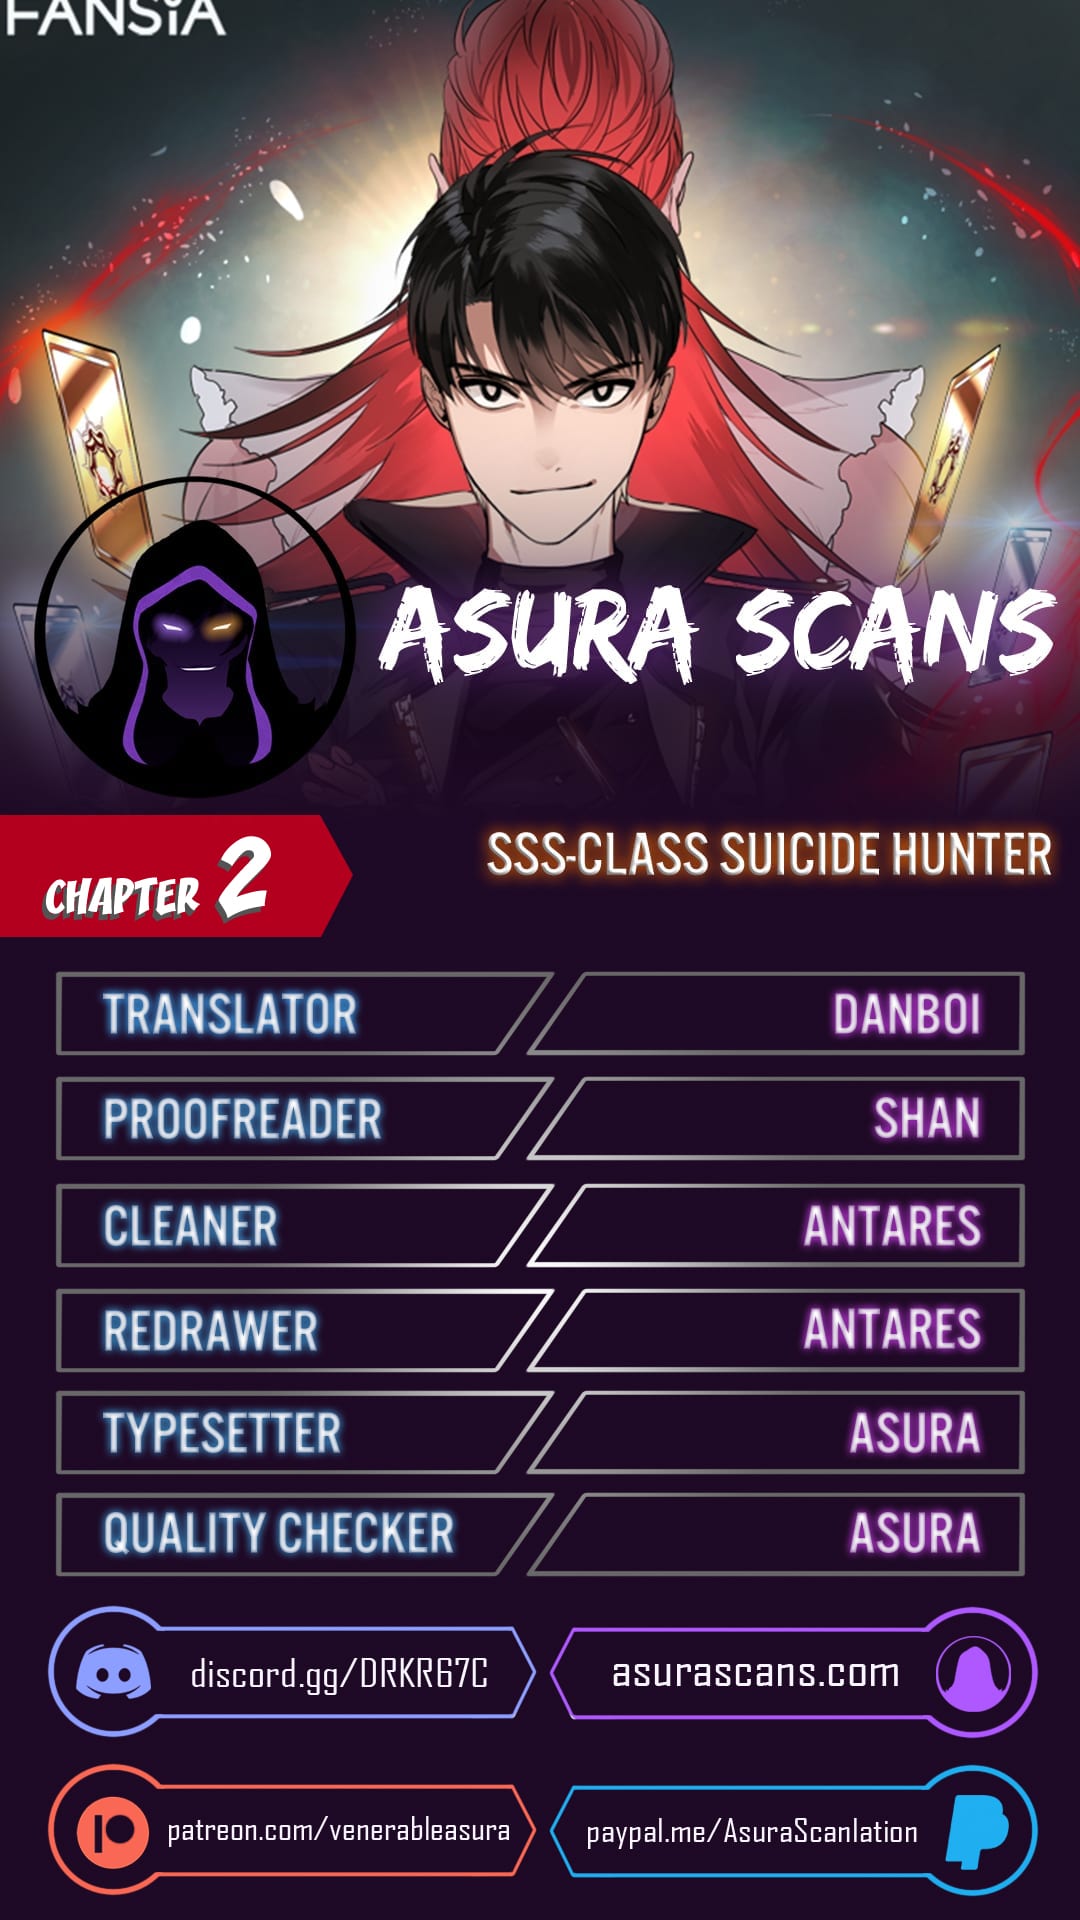 SSS-Class Suicide Hunter chapter 2